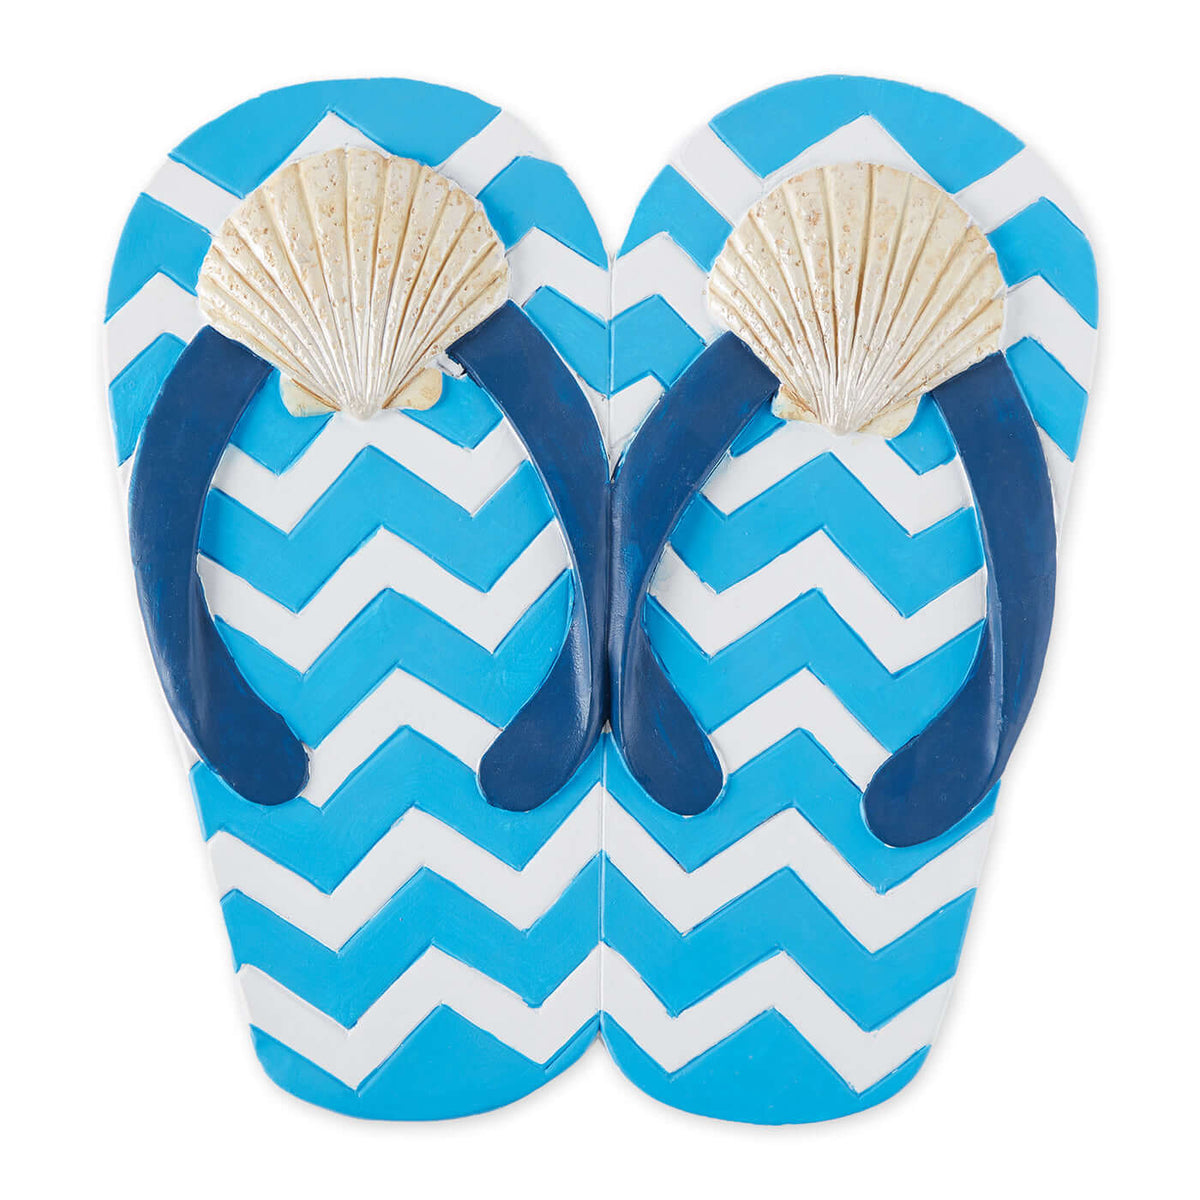  Flip Flops Decorative Stepping Stone- The House of Awareness